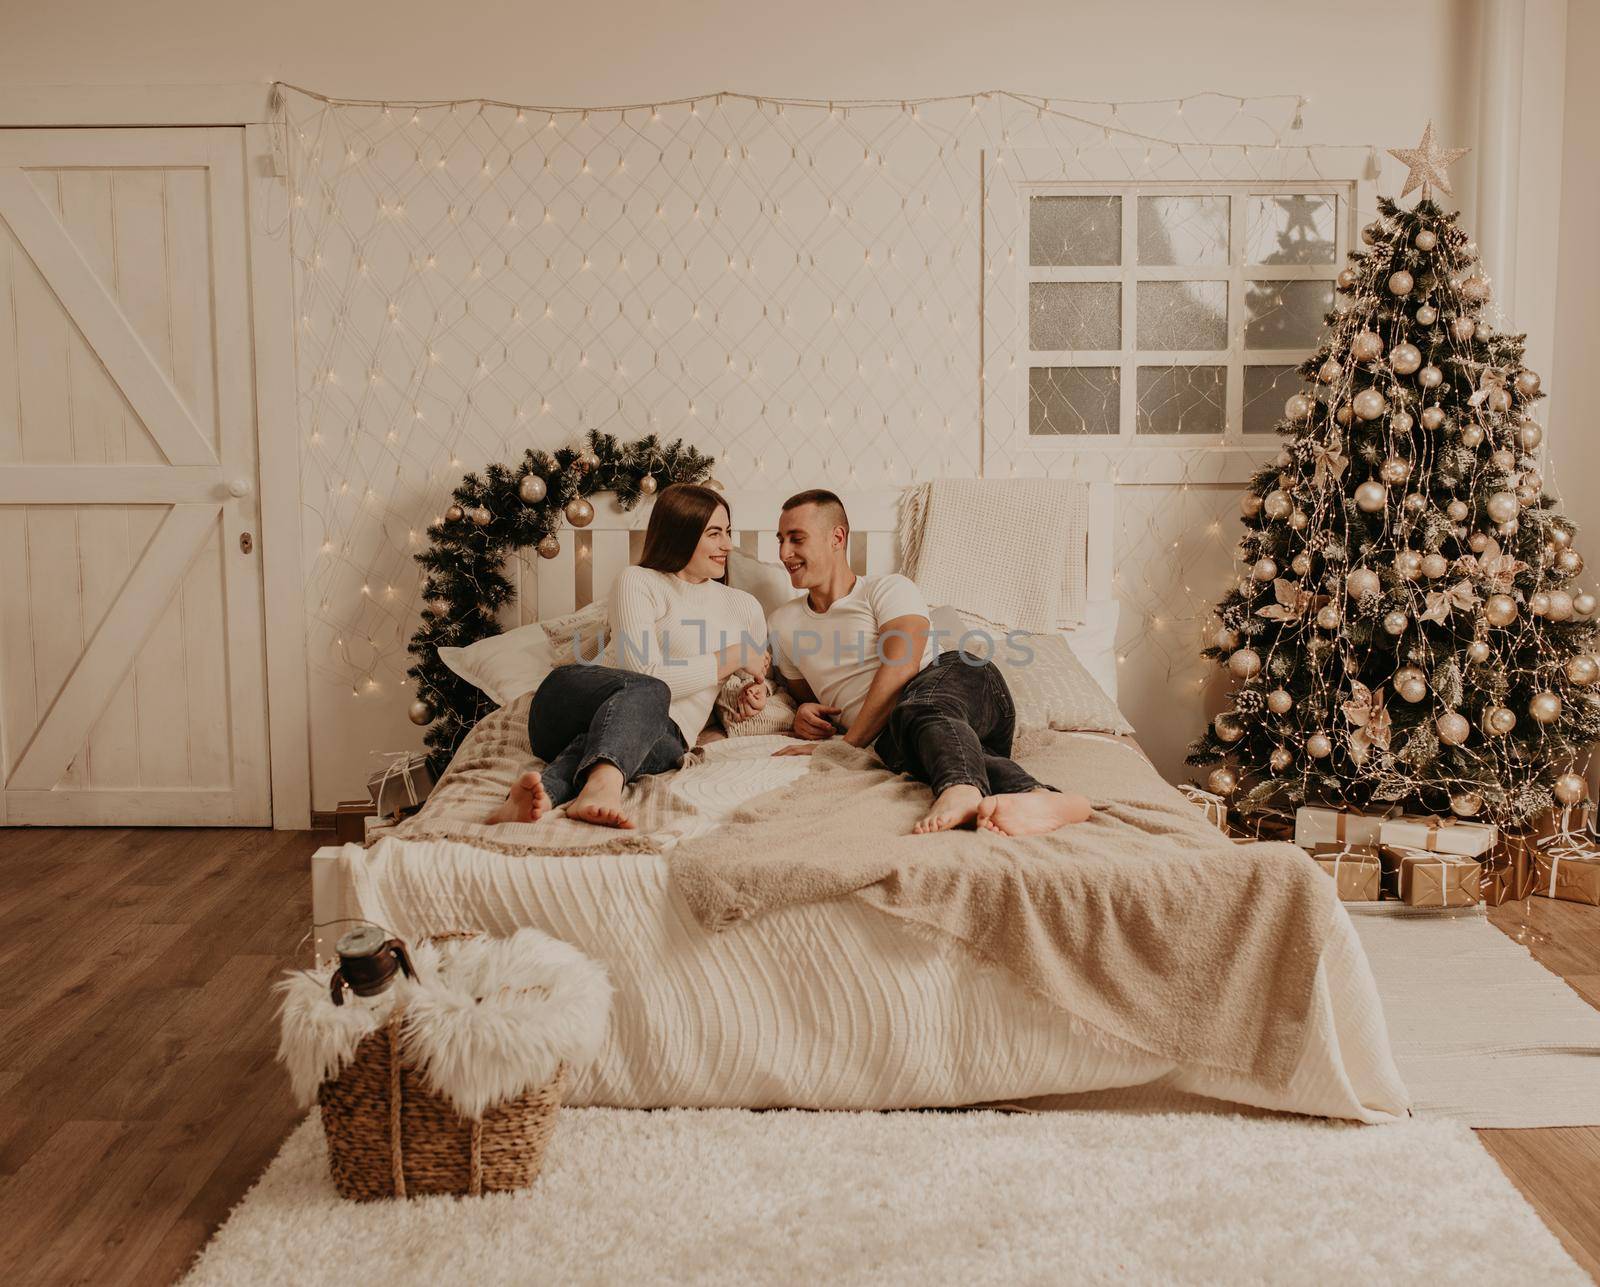 couple man and woman lie on bed bedroom near christmas tree.decorated house for New Year.Christmas morning. apartment interior. Valentine's Day celebration